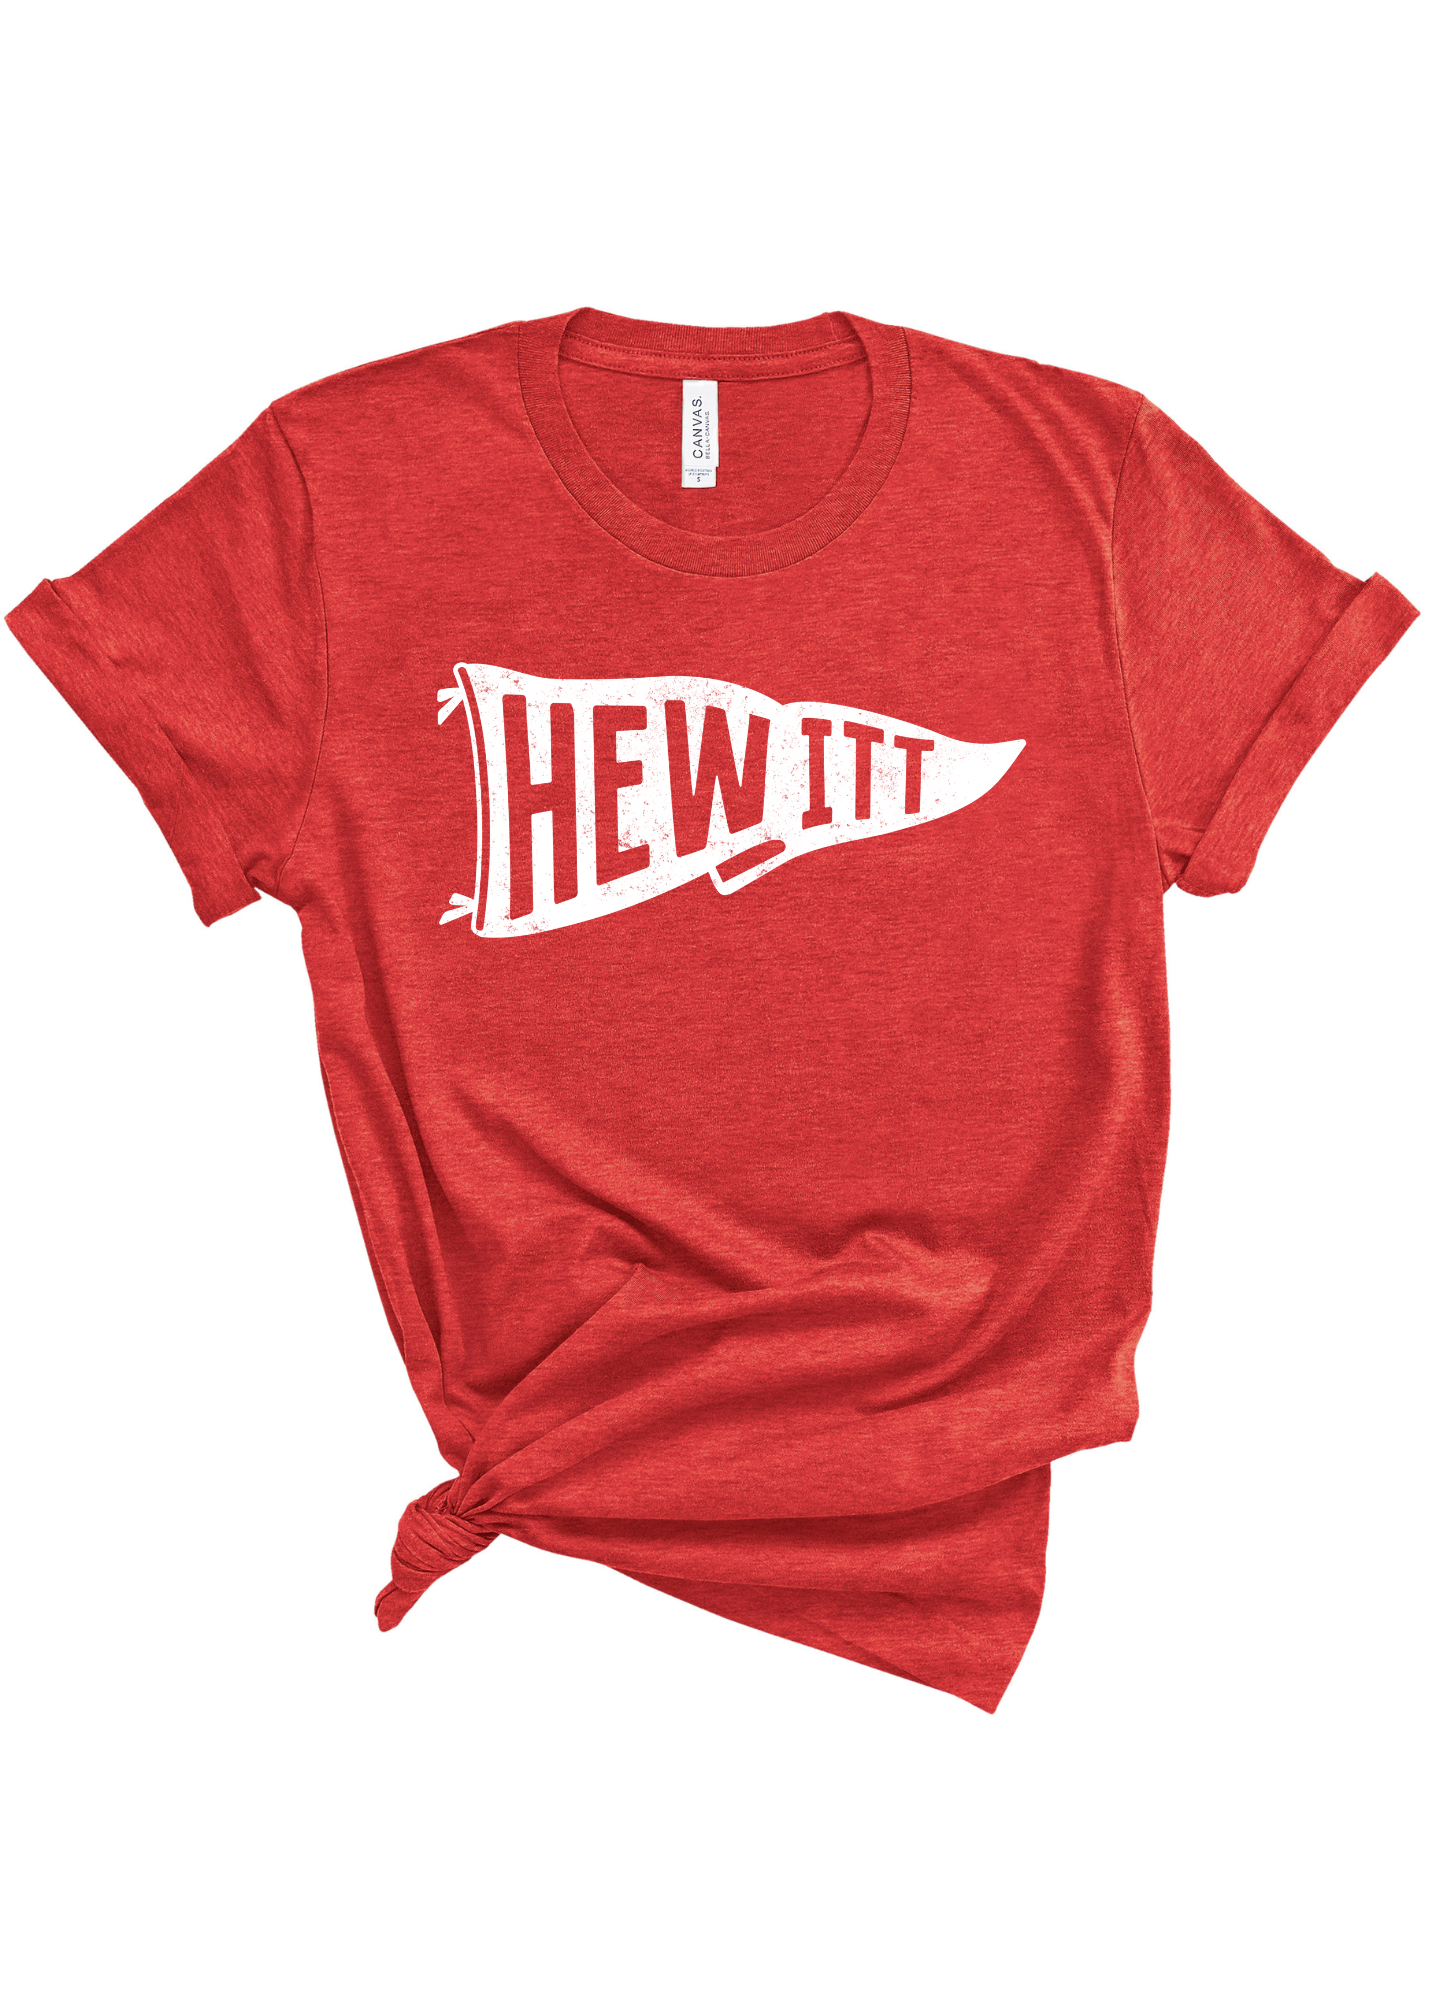 Hewitt Pennant | Adult Tee | RTS-Sister Shirts-Sister Shirts, Cute & Custom Tees for Mama & Littles in Trussville, Alabama.